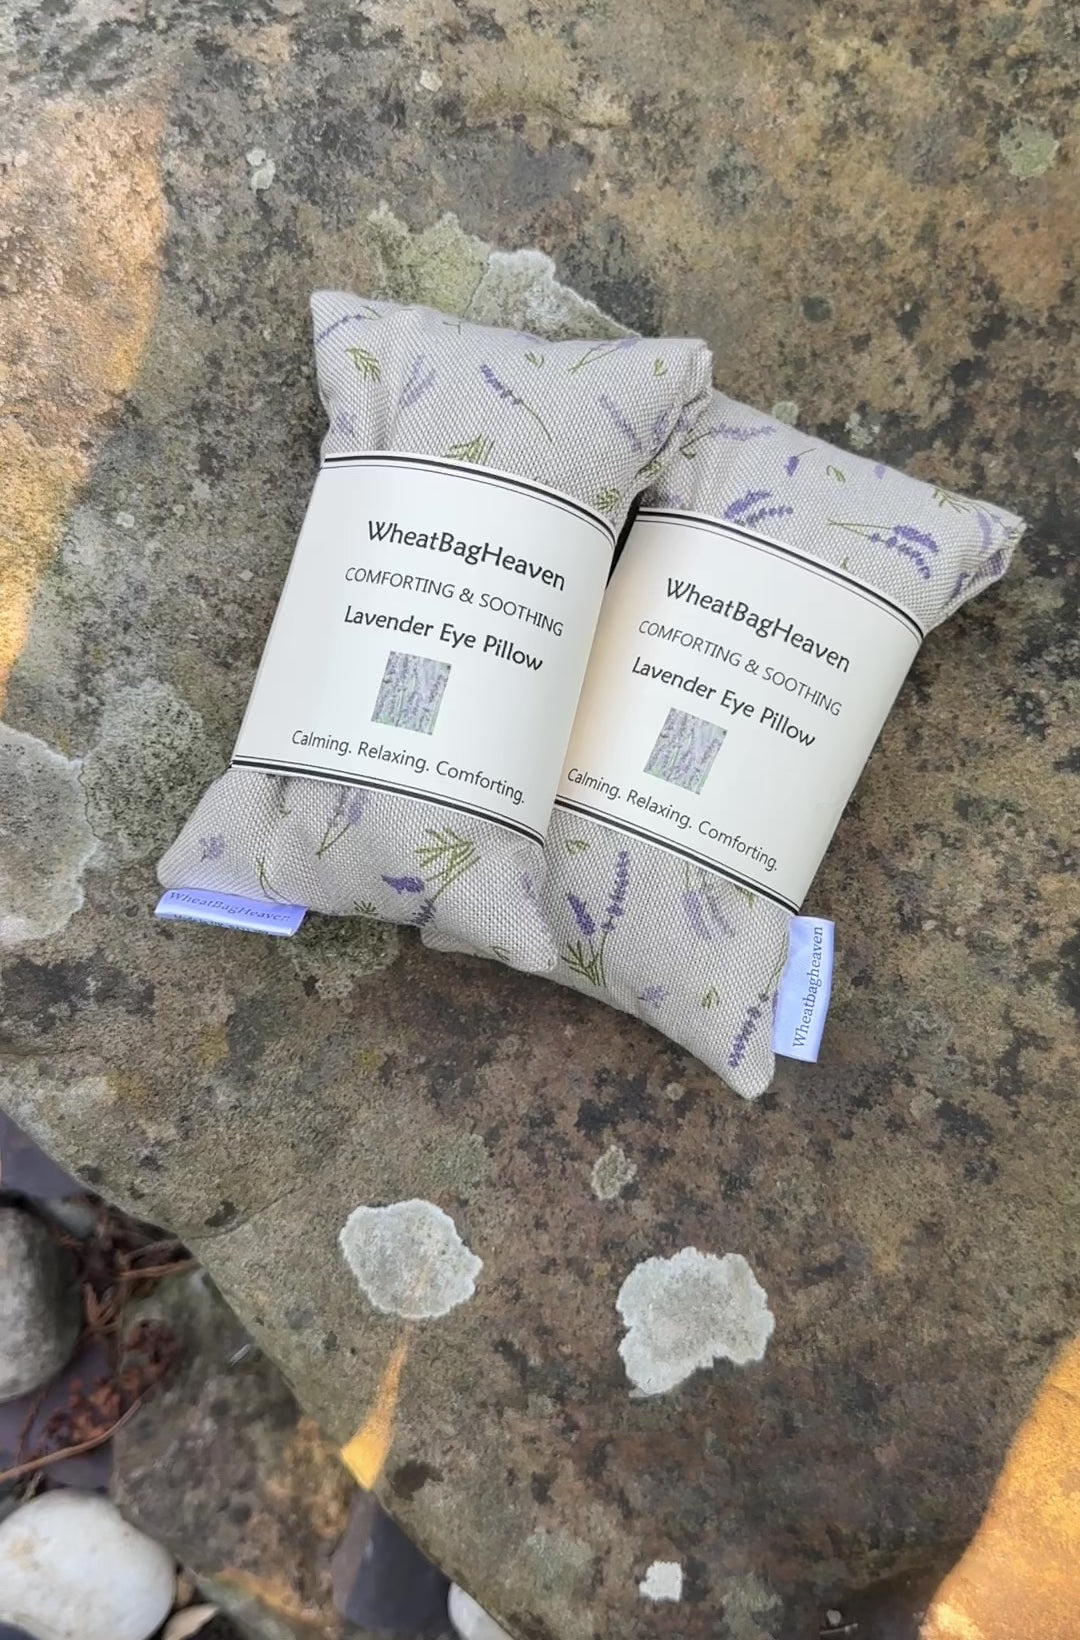 Video of lavender scented eye pillows filled with organic flax seed and lavender buds